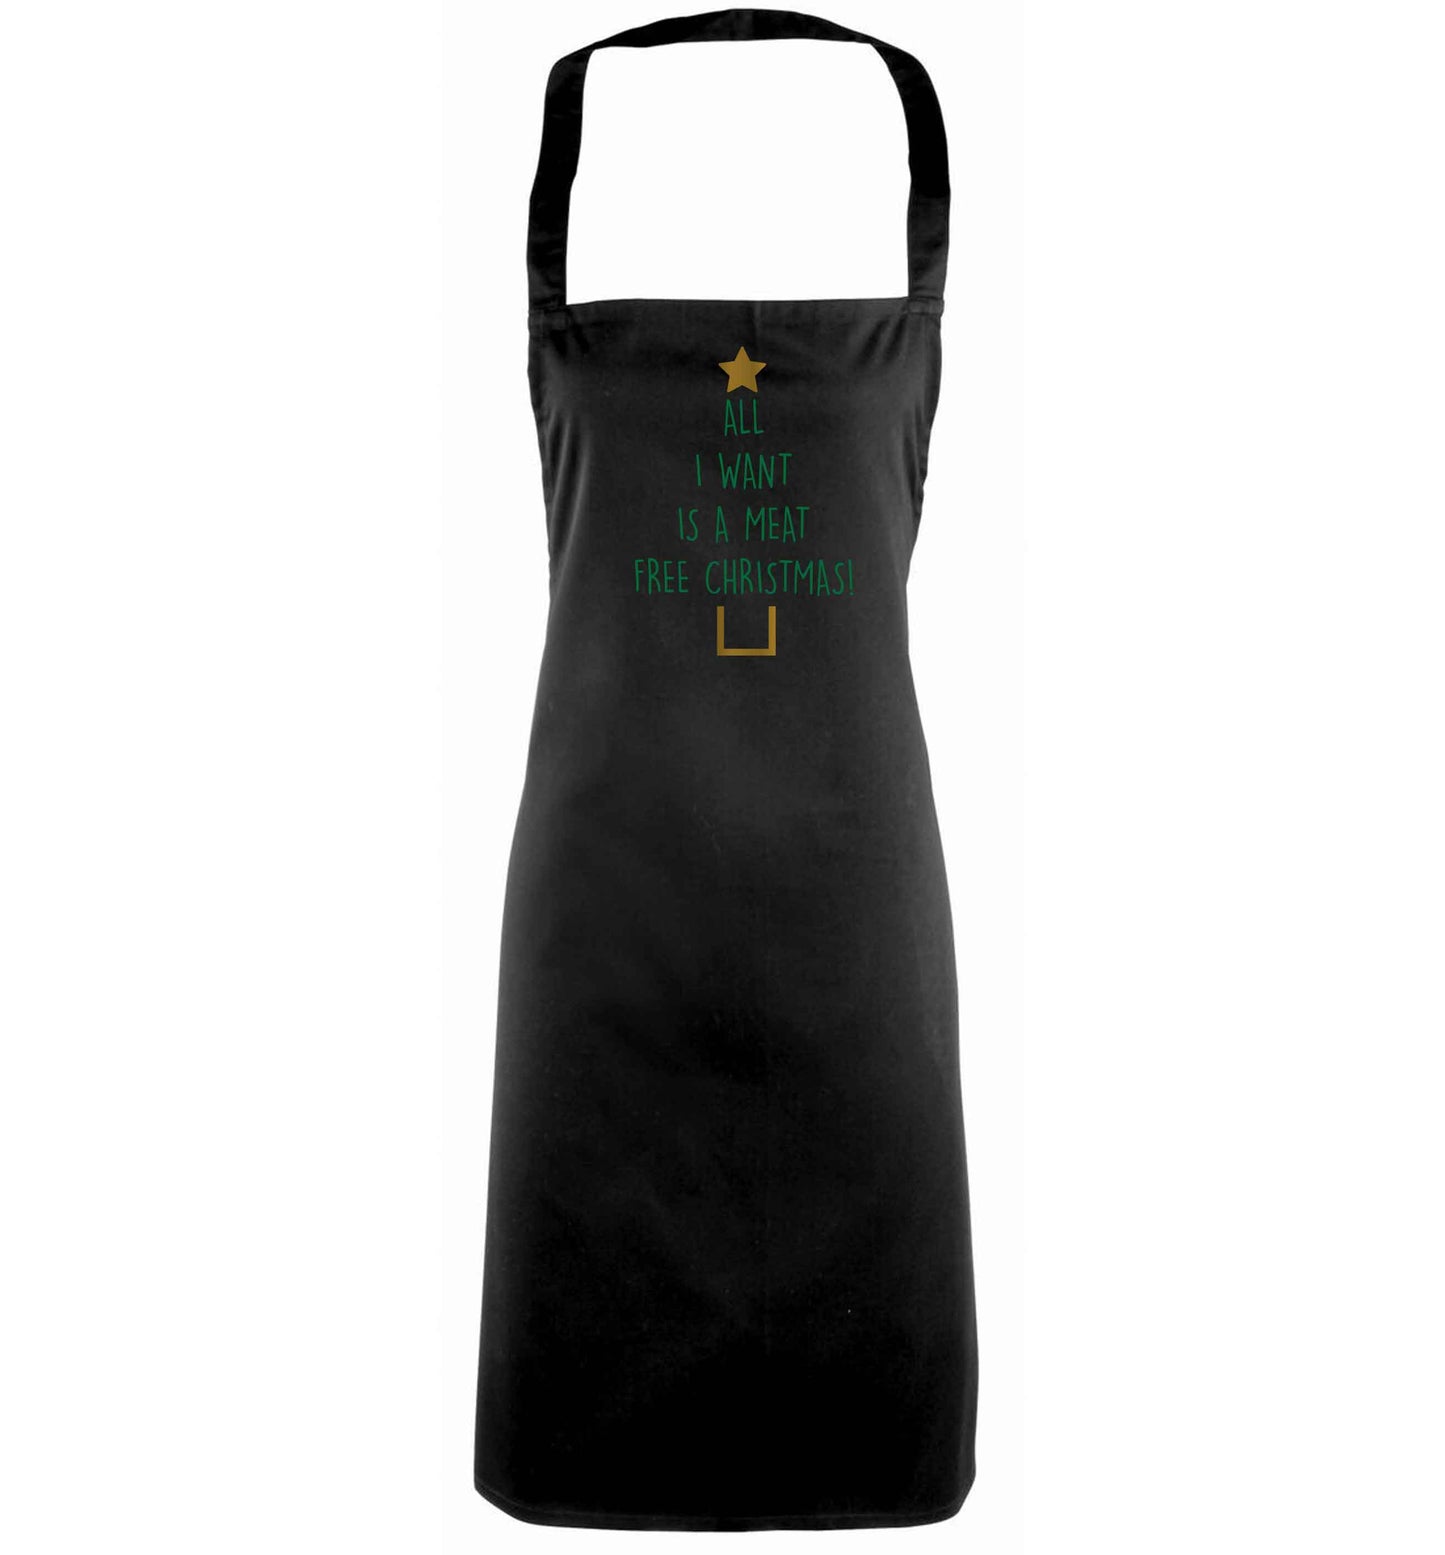 All I want is a meat free Christmas black apron